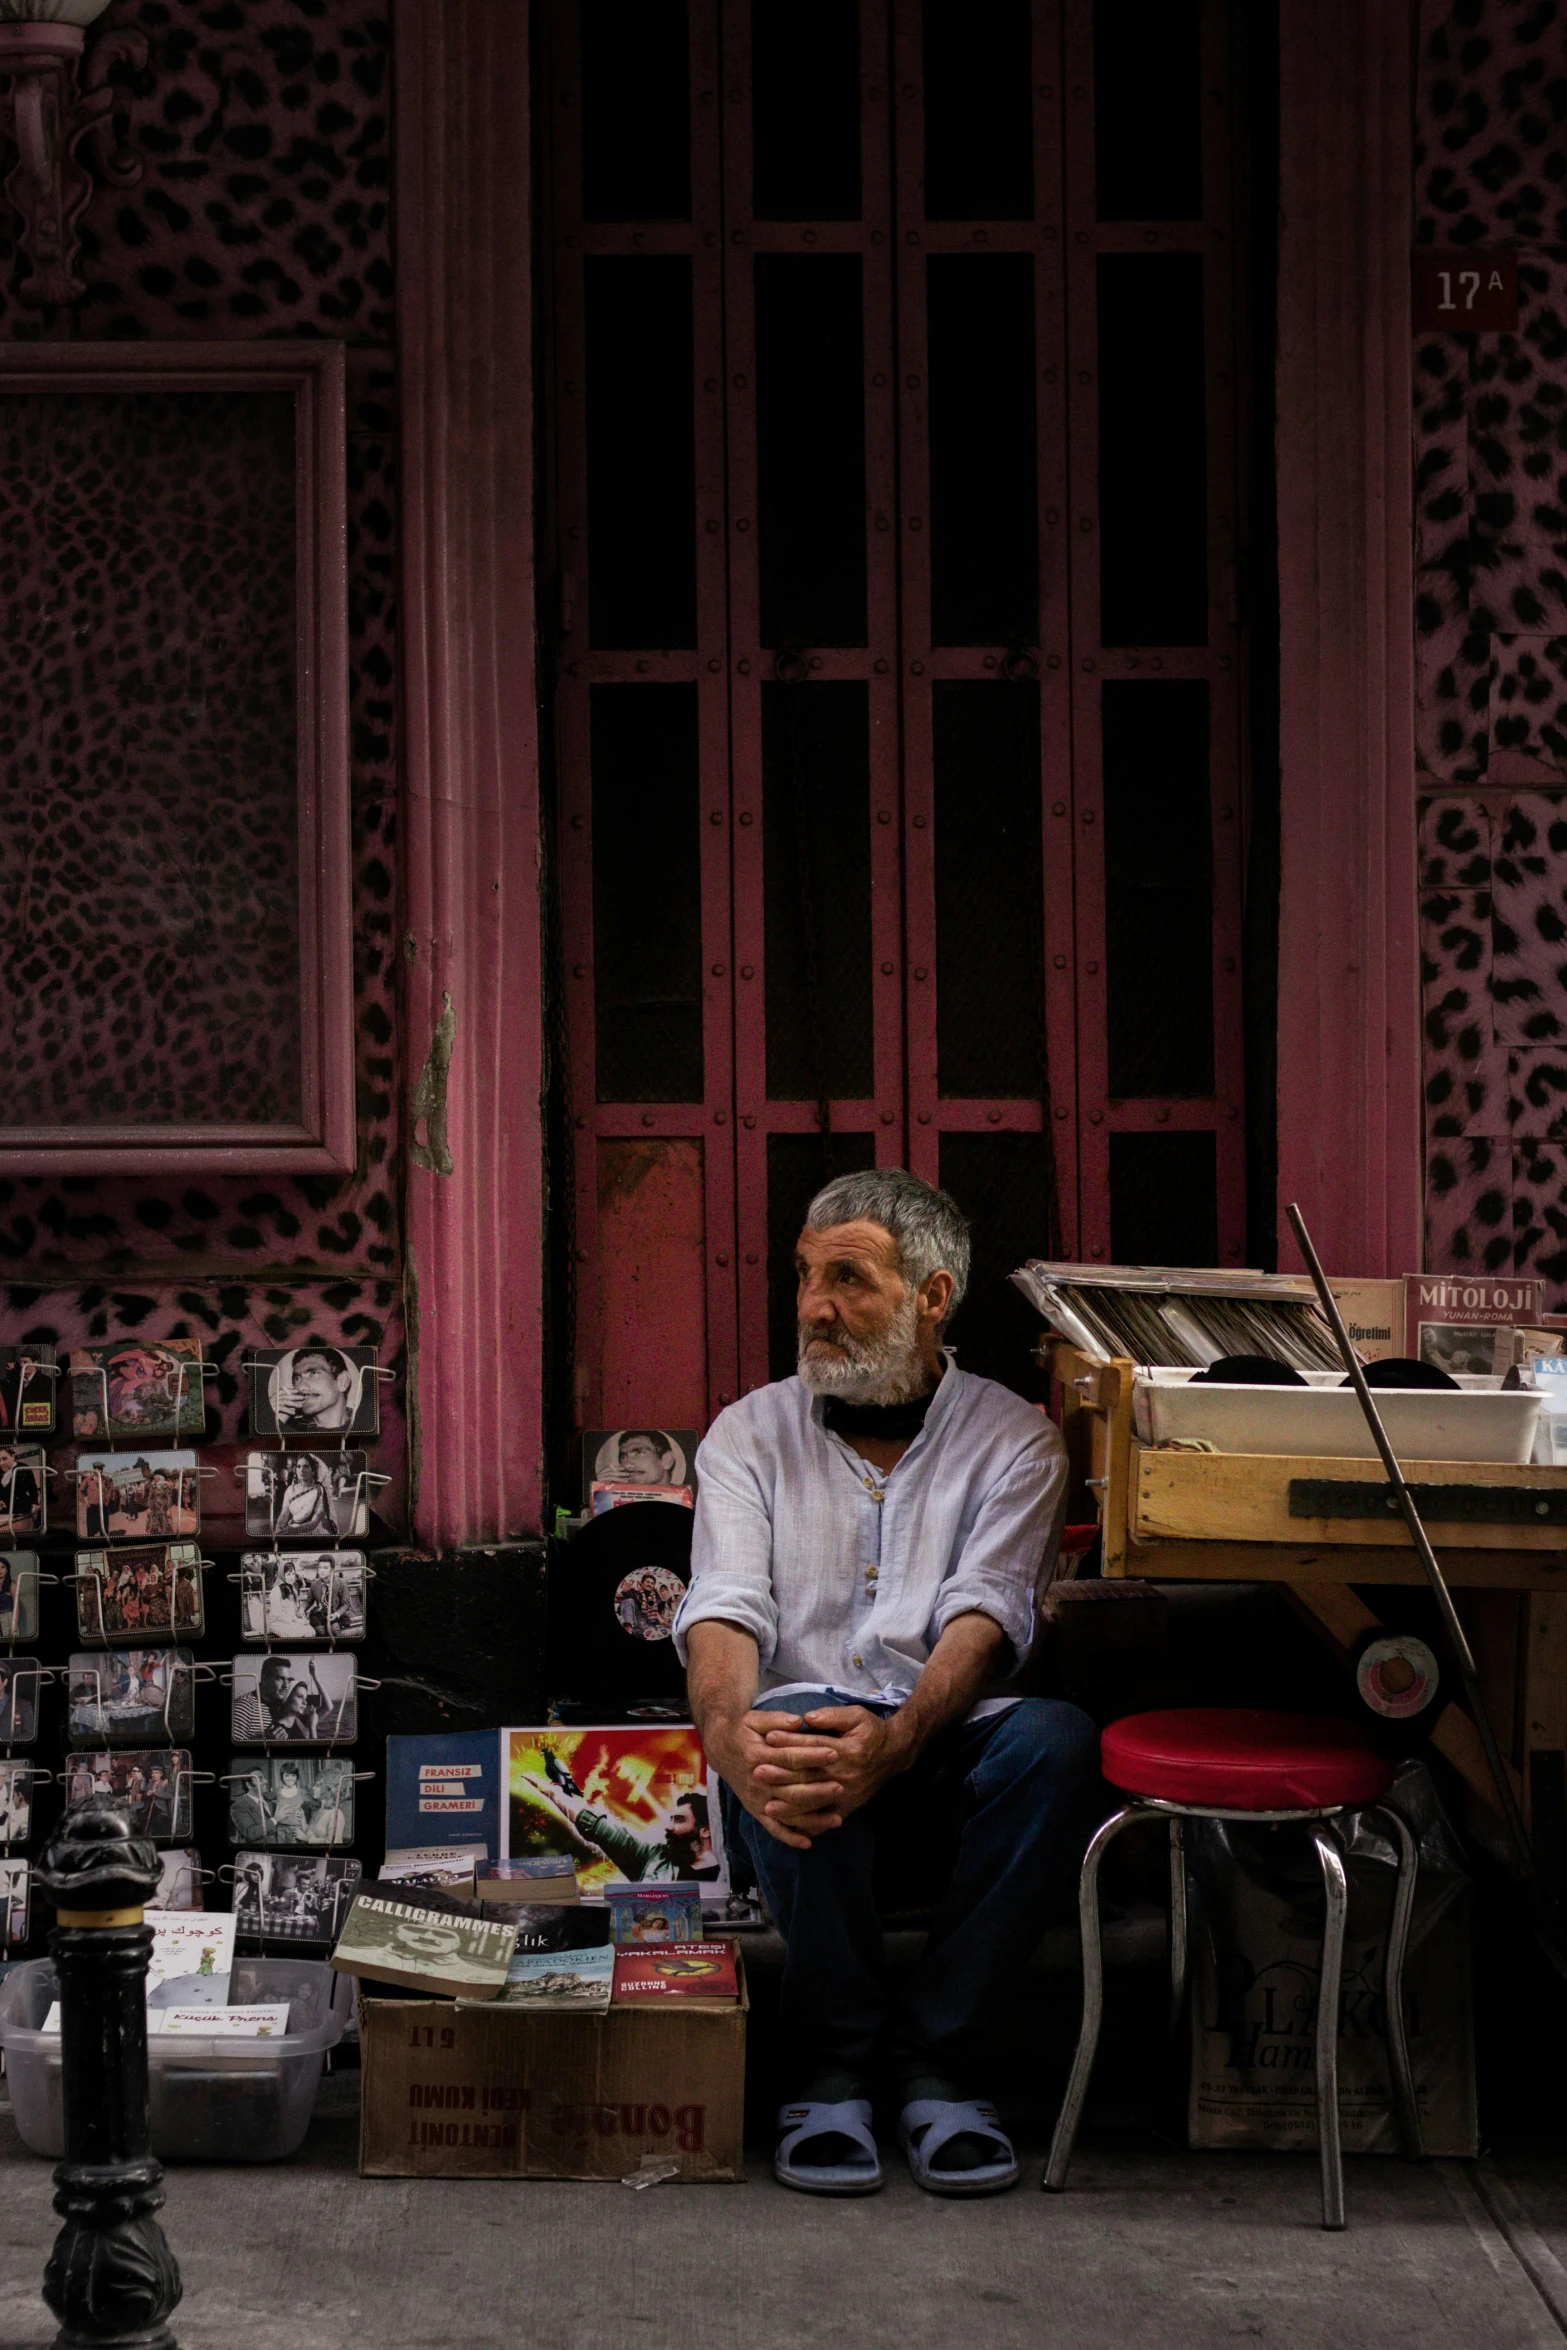 a man sitting in front of a store on the street